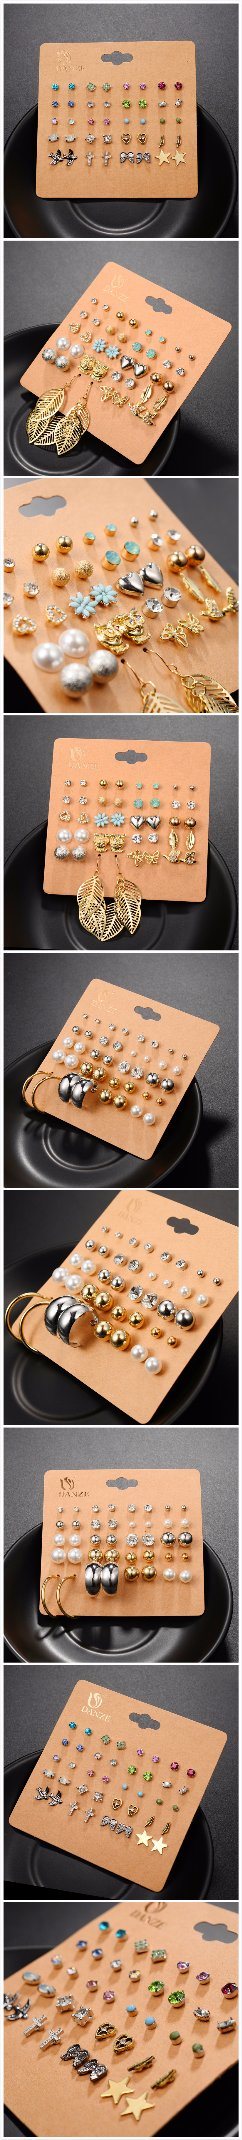 Punk 20 Pairs Pack Set Brincos Mixed Stud Earrings for Women